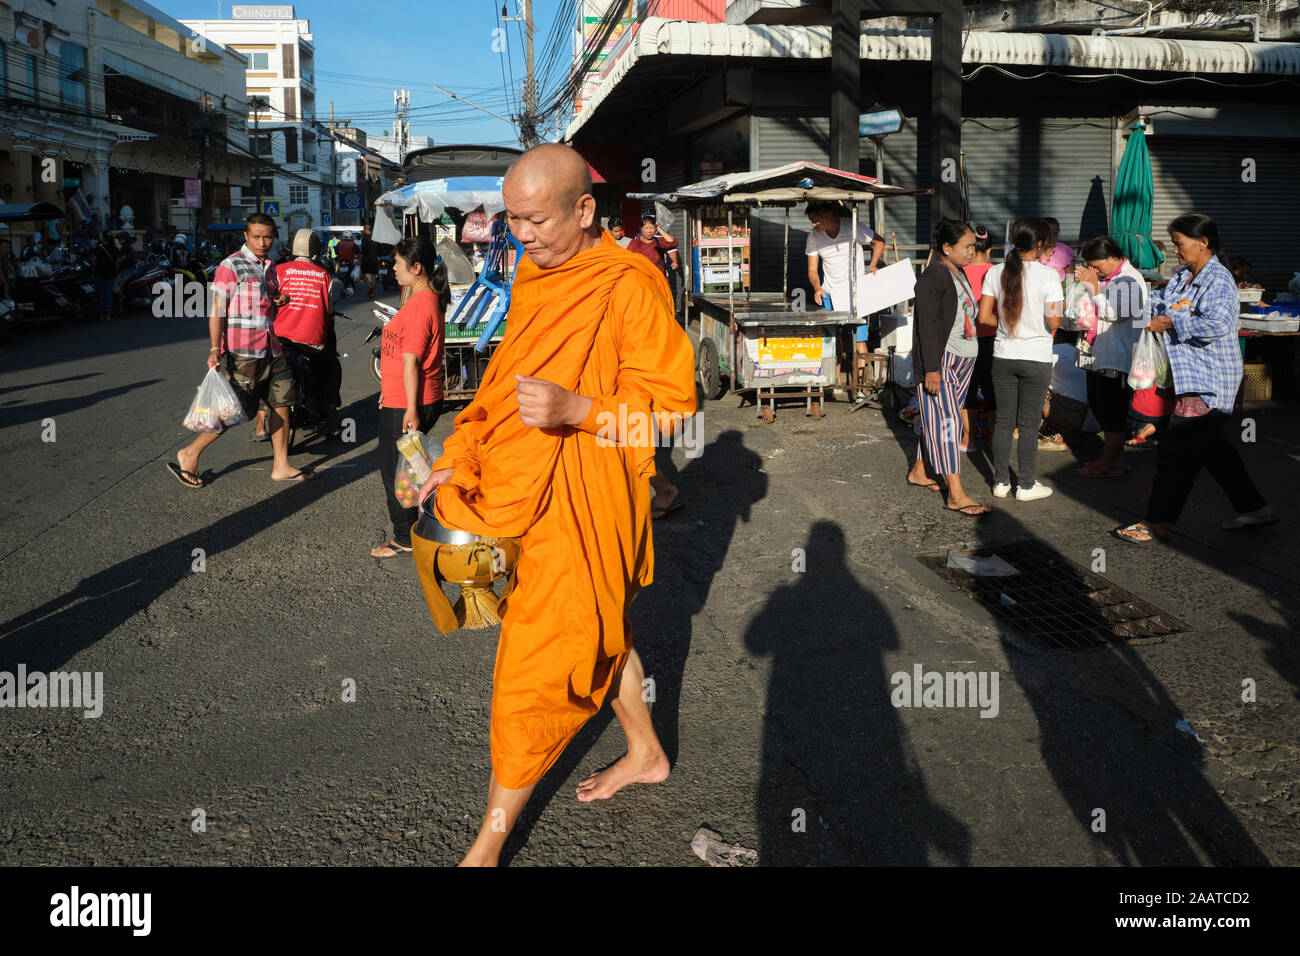 A Buddhist monk on his early morning alms round and carrying an alms bowl passes through the main market in Phuket Town, Phuket, Thailand Stock Photo